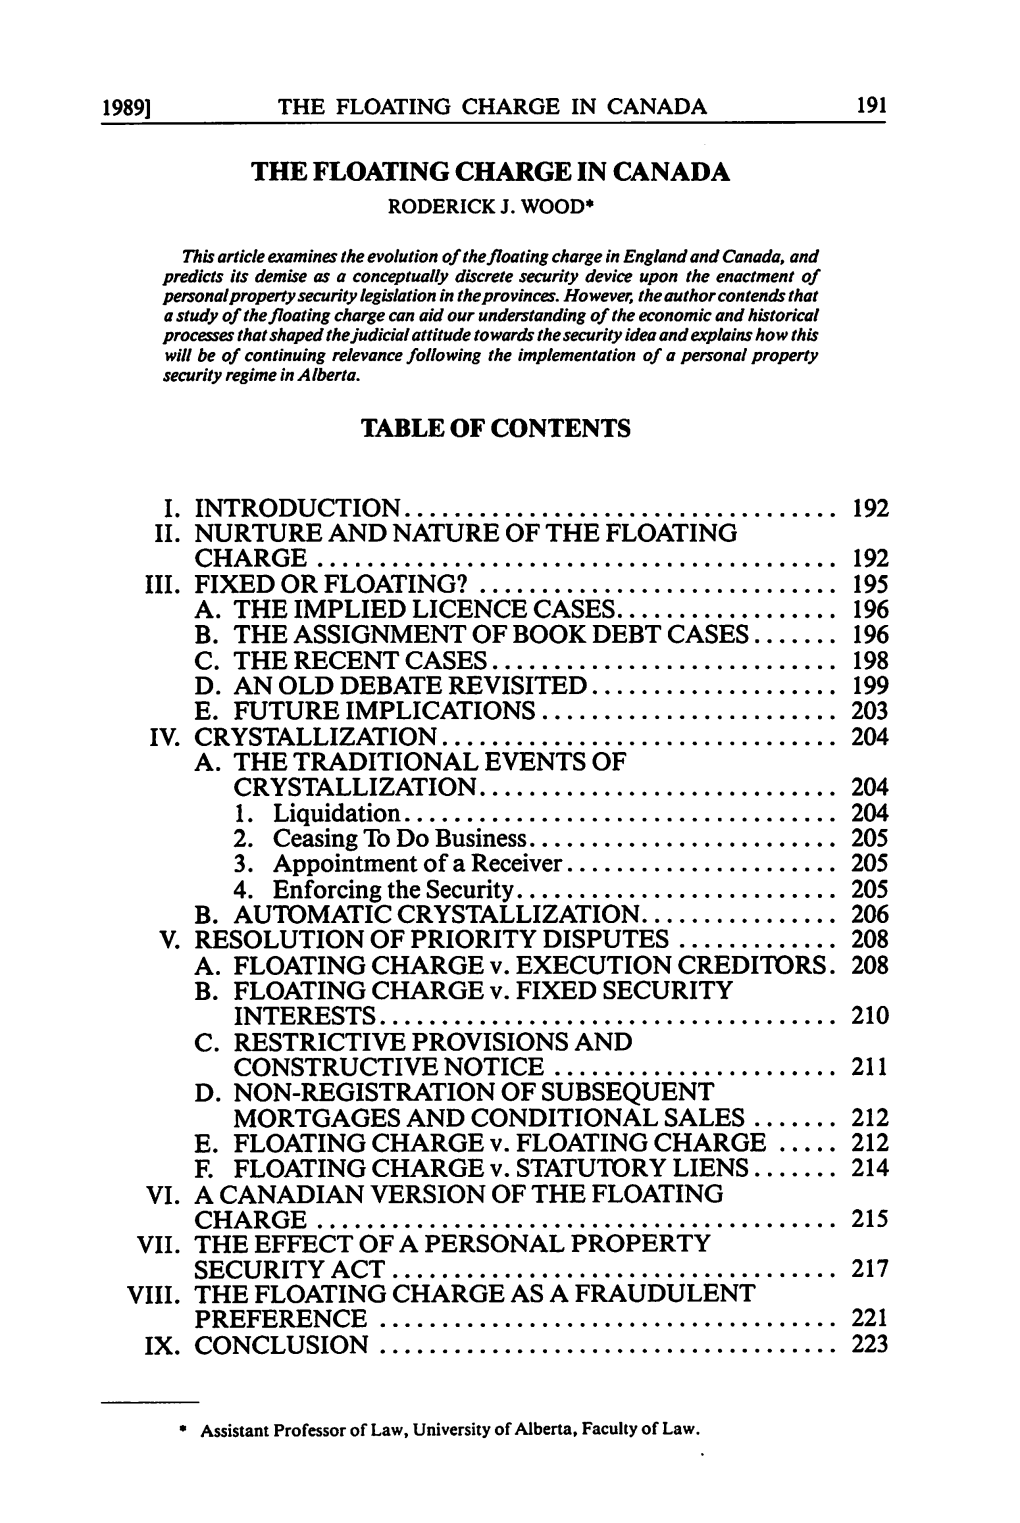 The Floating Charge in Canada Table of Contents